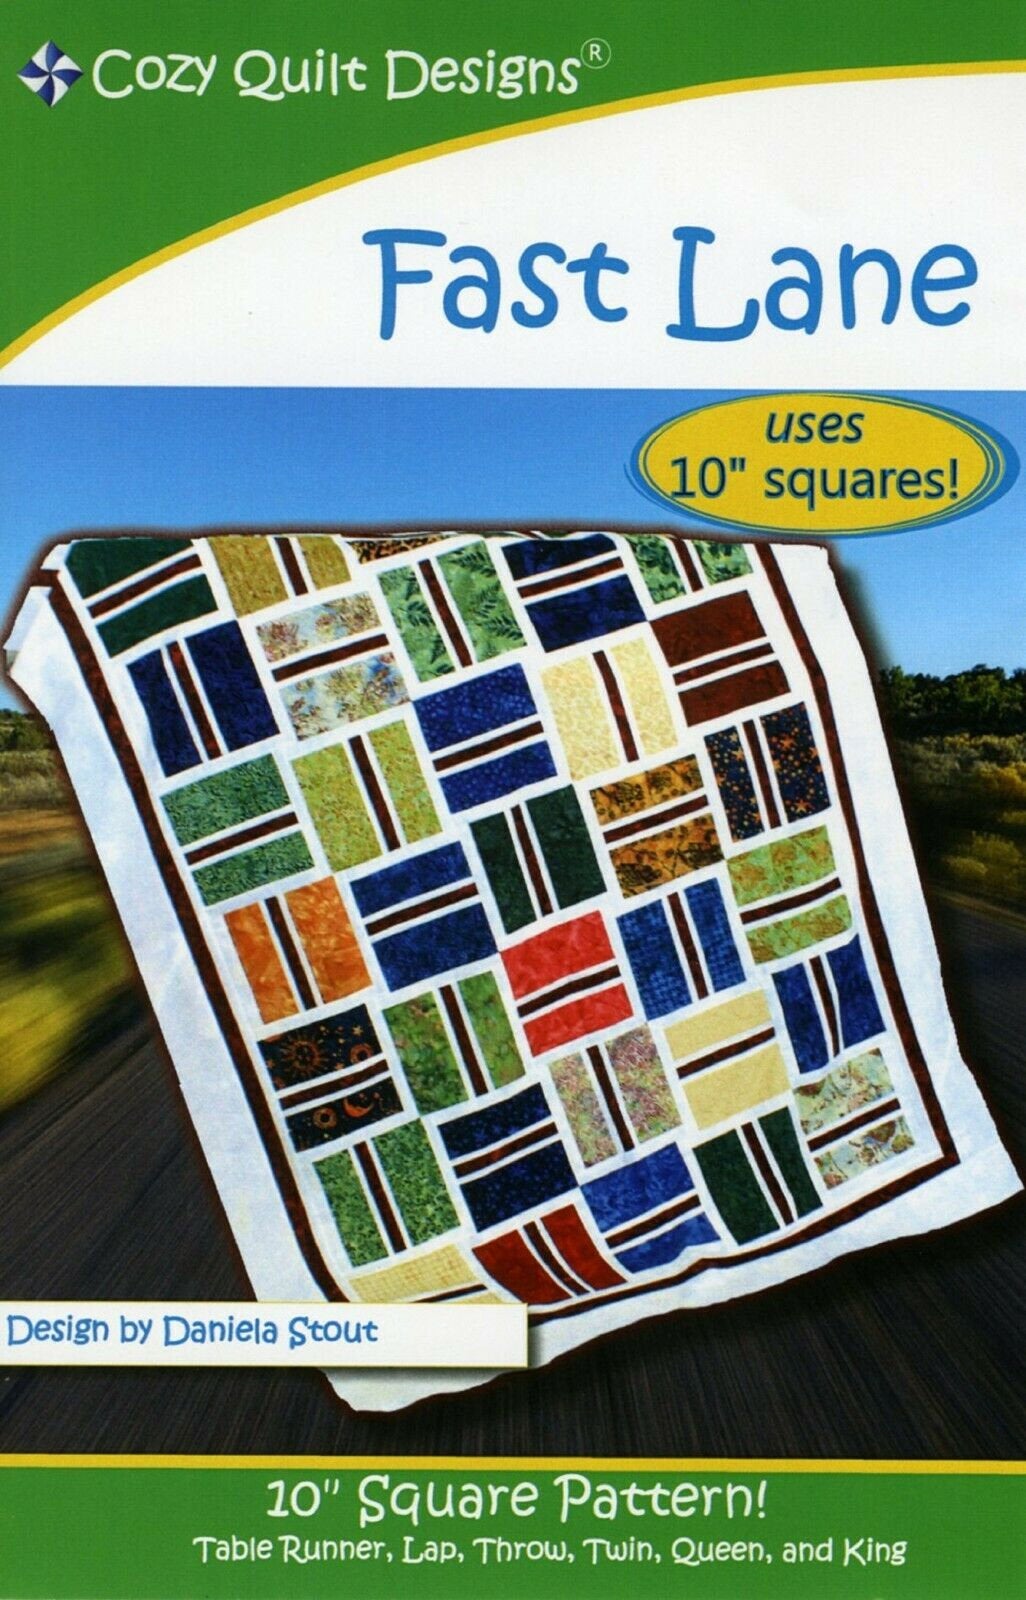 Fast Lane Pattern by Cozy Quilt Designs